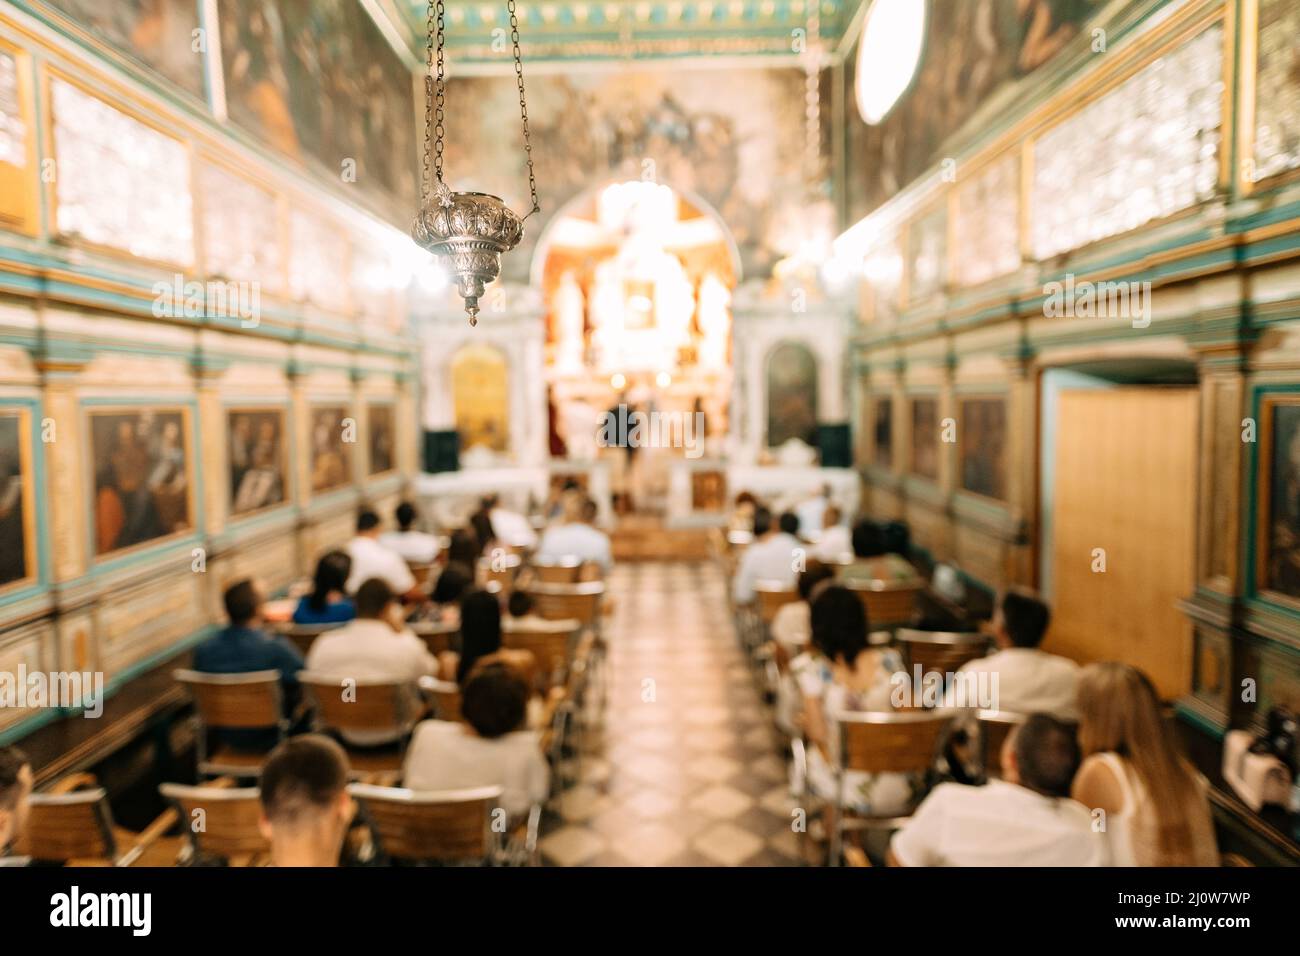 Censer hangs from the ceiling in a church during a divine service Stock Photo